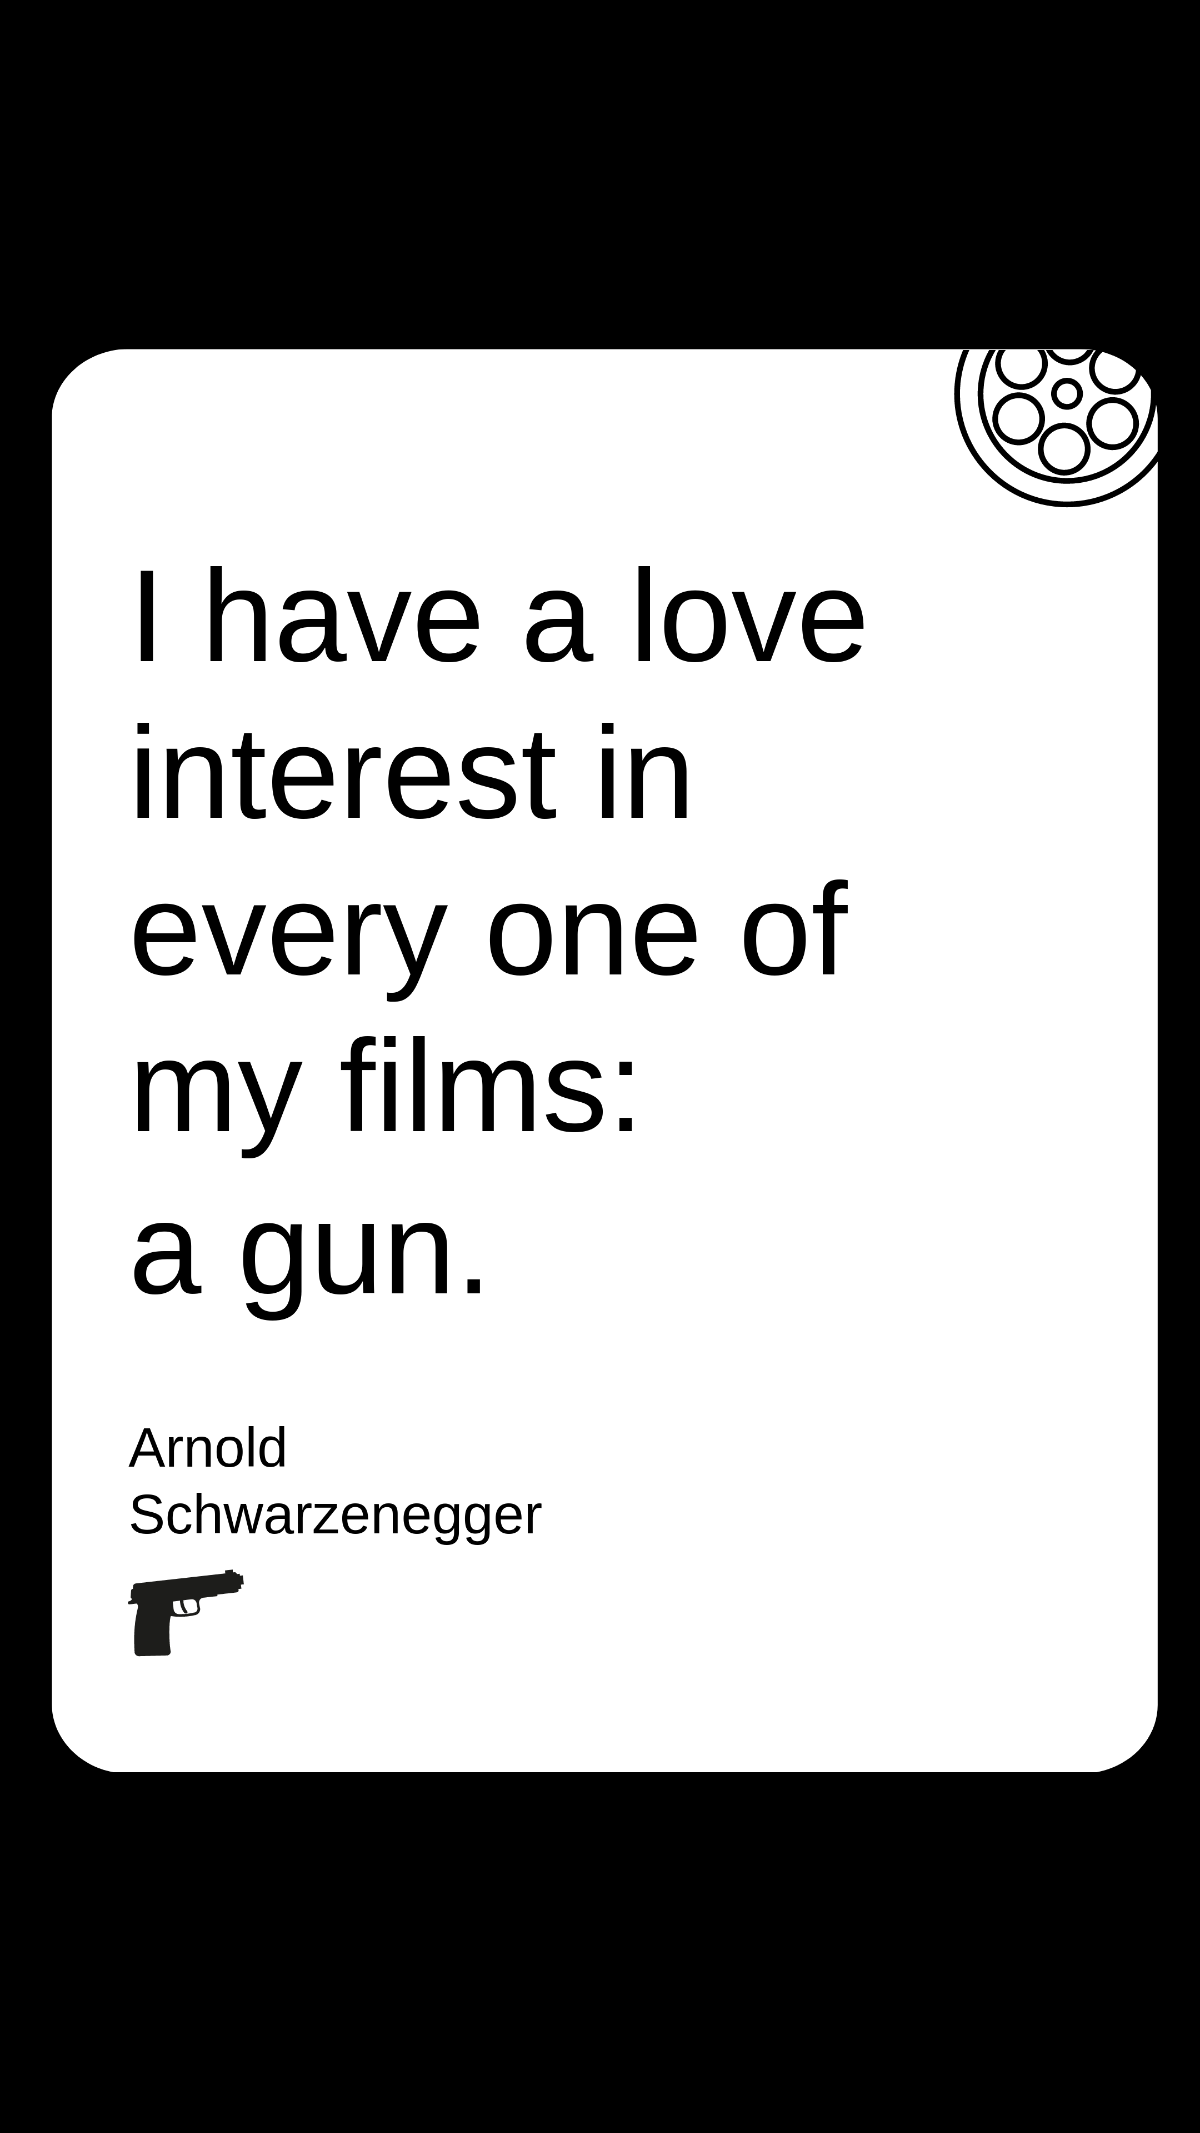 Arnold Schwarzenegger - I have a love interest in every one of my films: a gun. Template